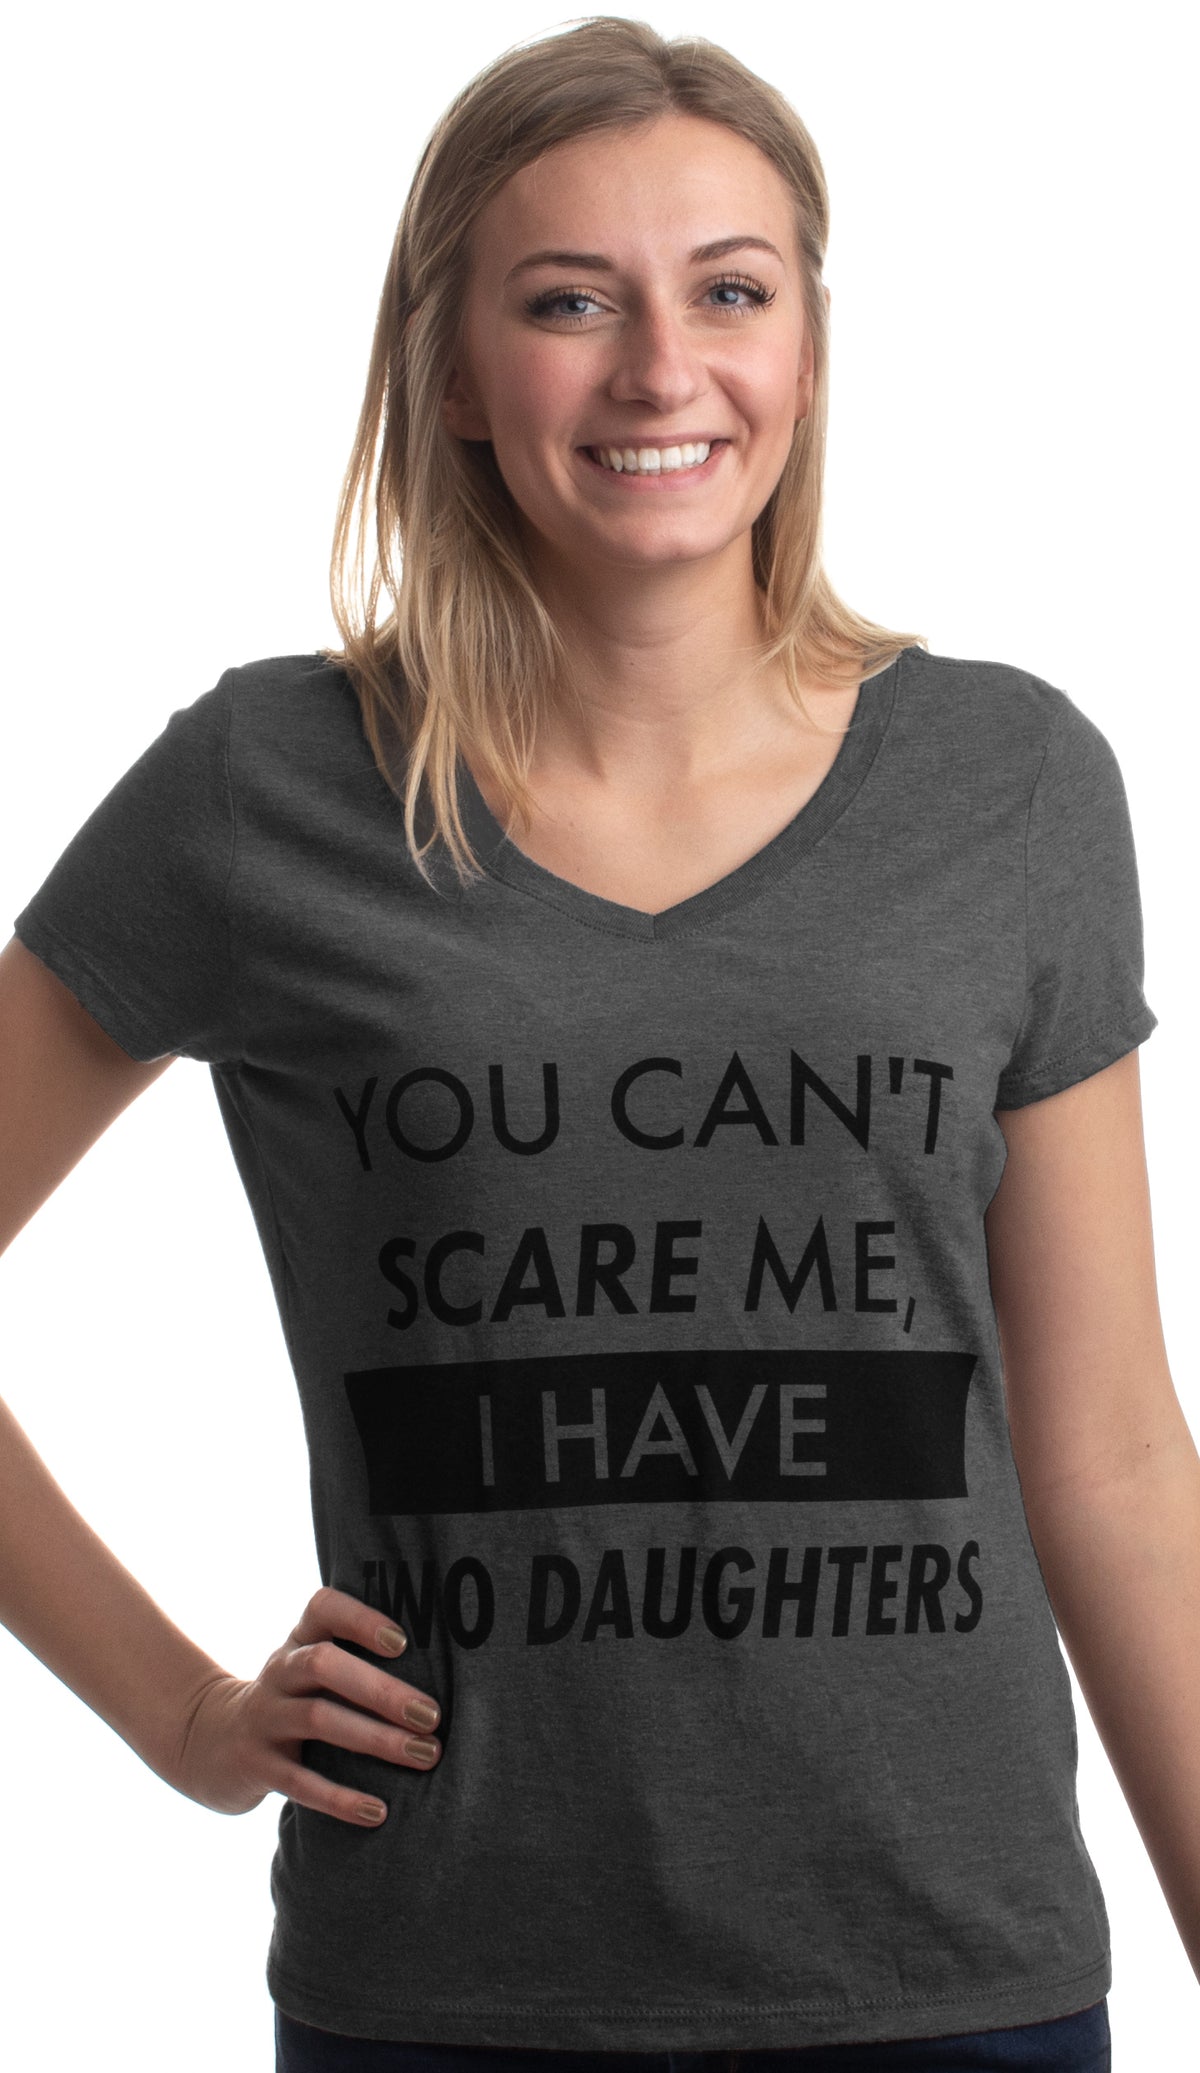 You Can't Scare Me, I have Two Daughters | Funny Mom V-neck T-shirt for Women